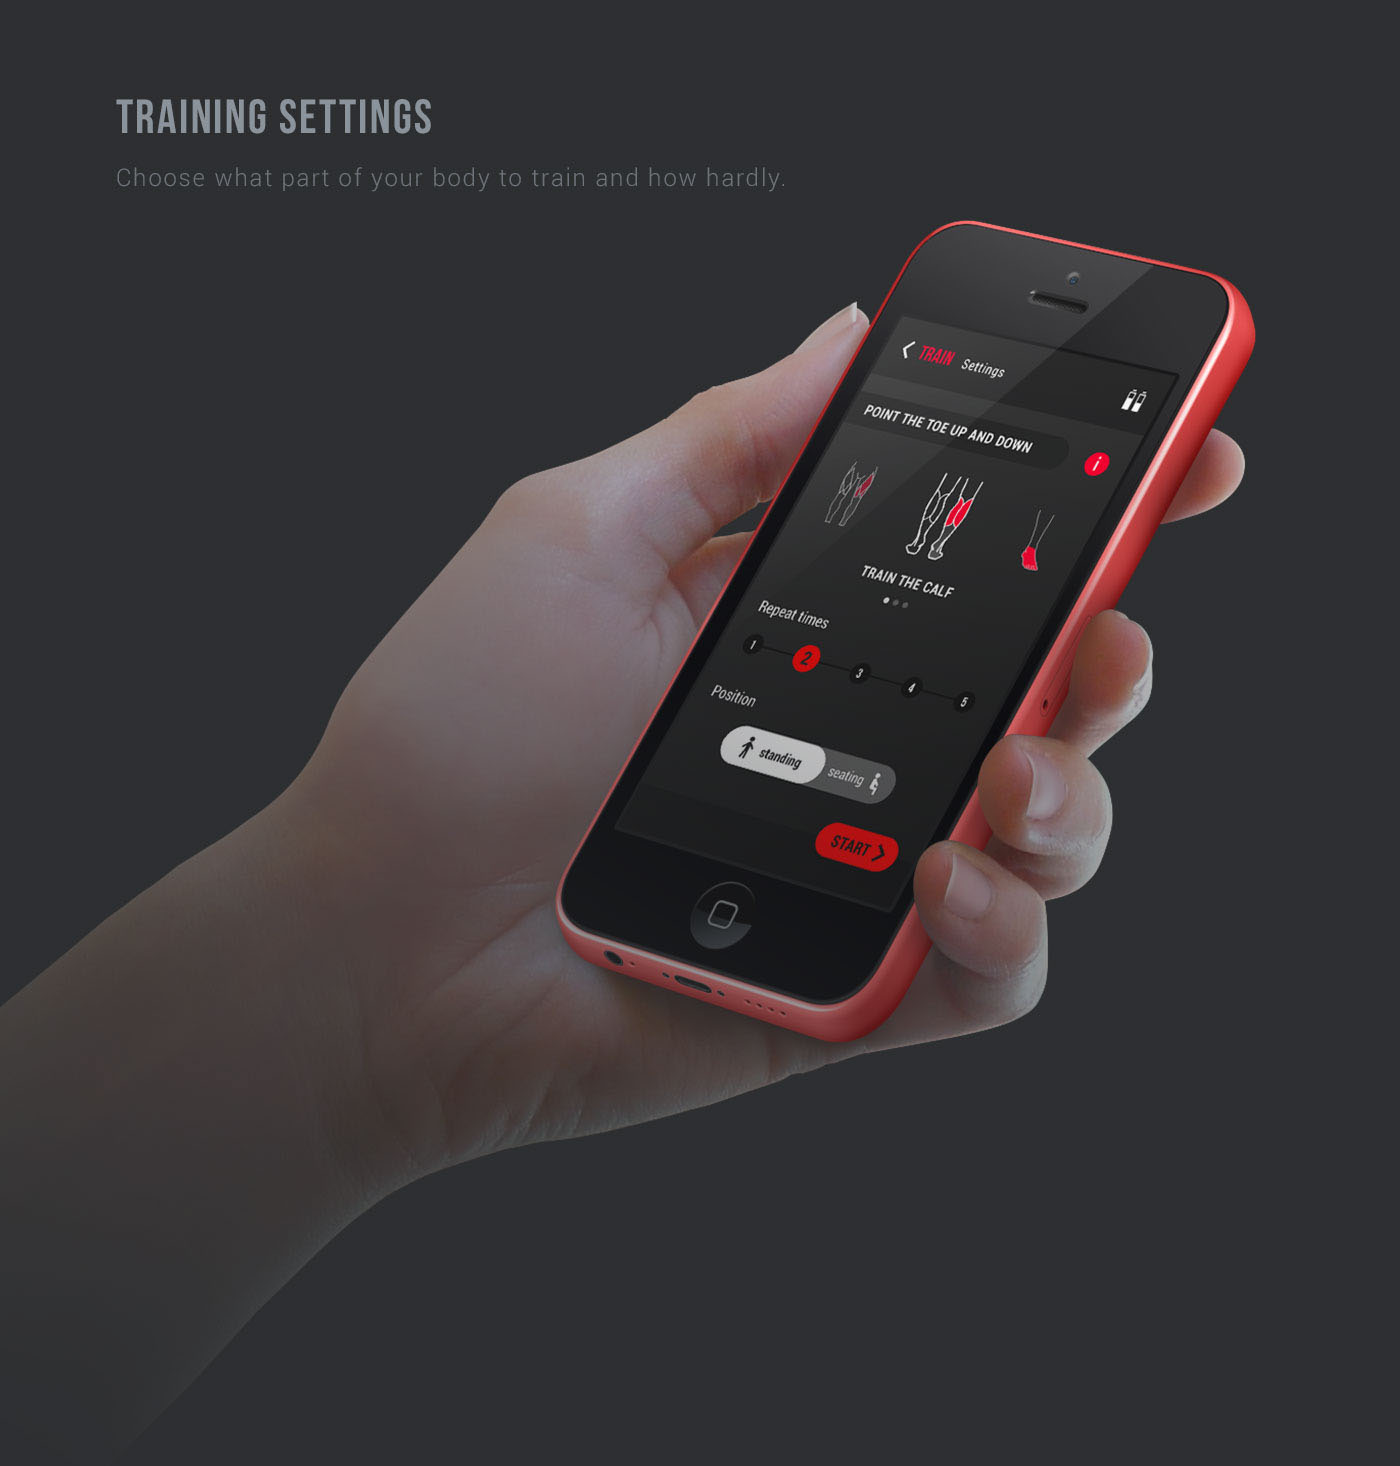 IoT interactive shoes Interface animations iphone Mockup elegant train fitness